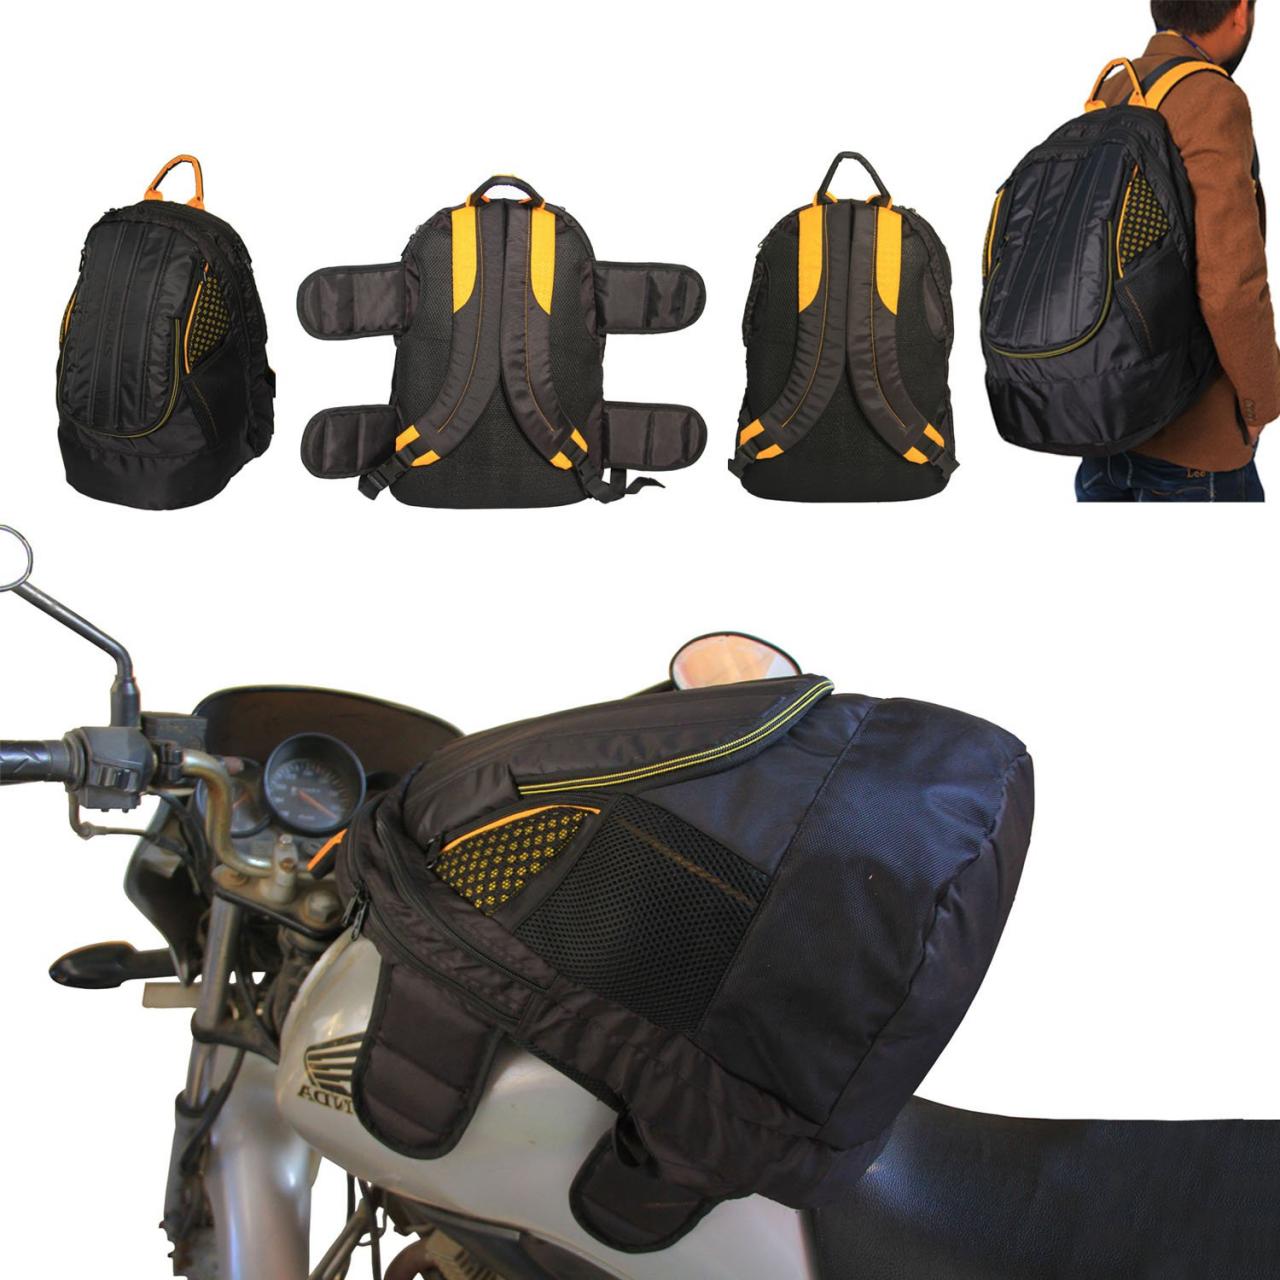 Sticker Magnetic Tank Bag for Motorcycle/Bike Riders (35 Liter Capacity,  Fits Up to 15-Inch Laptops, Black Color with Yellow Pattern) : Amazon.in:  Car & Motorbike